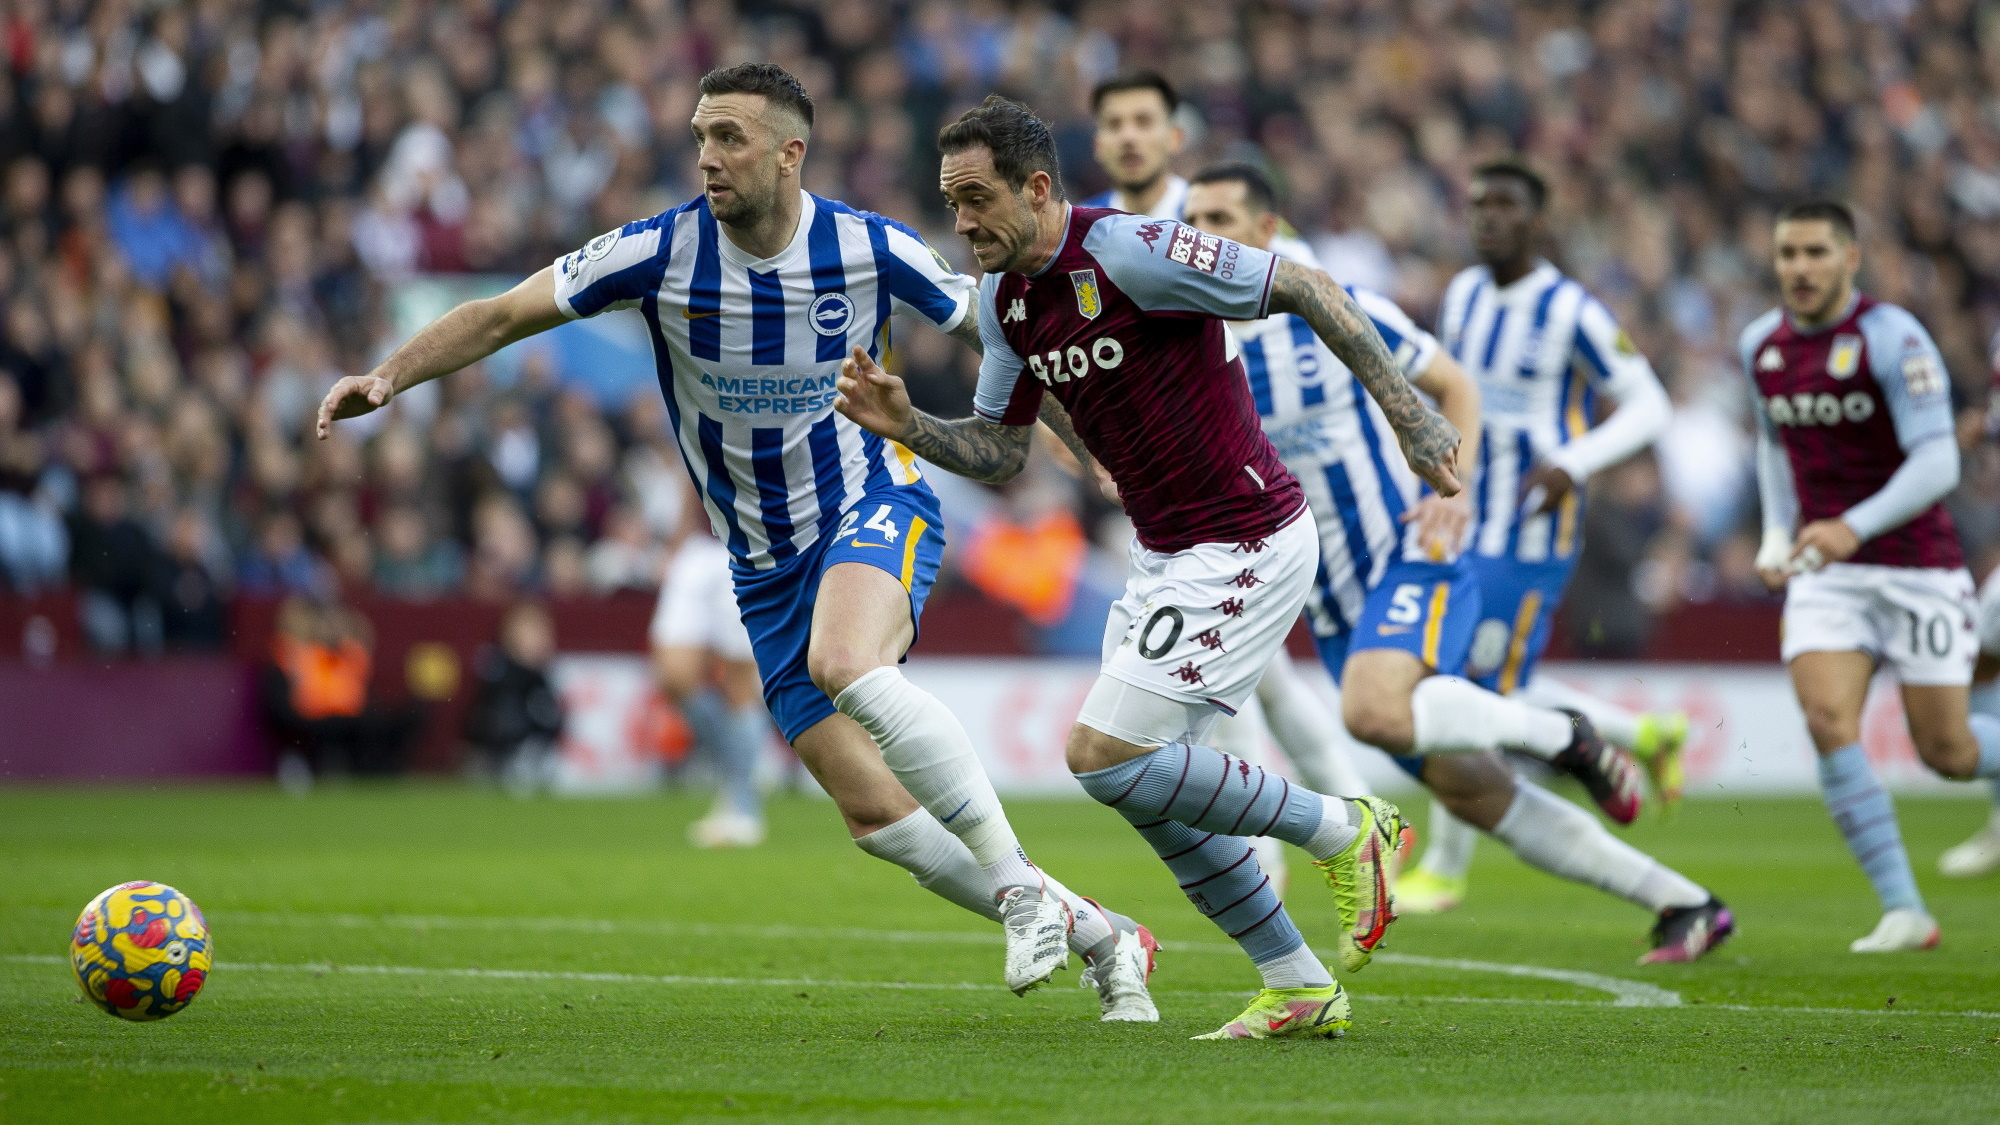 Danny Ings of Aston Villa playing against Brighton in the Premier League